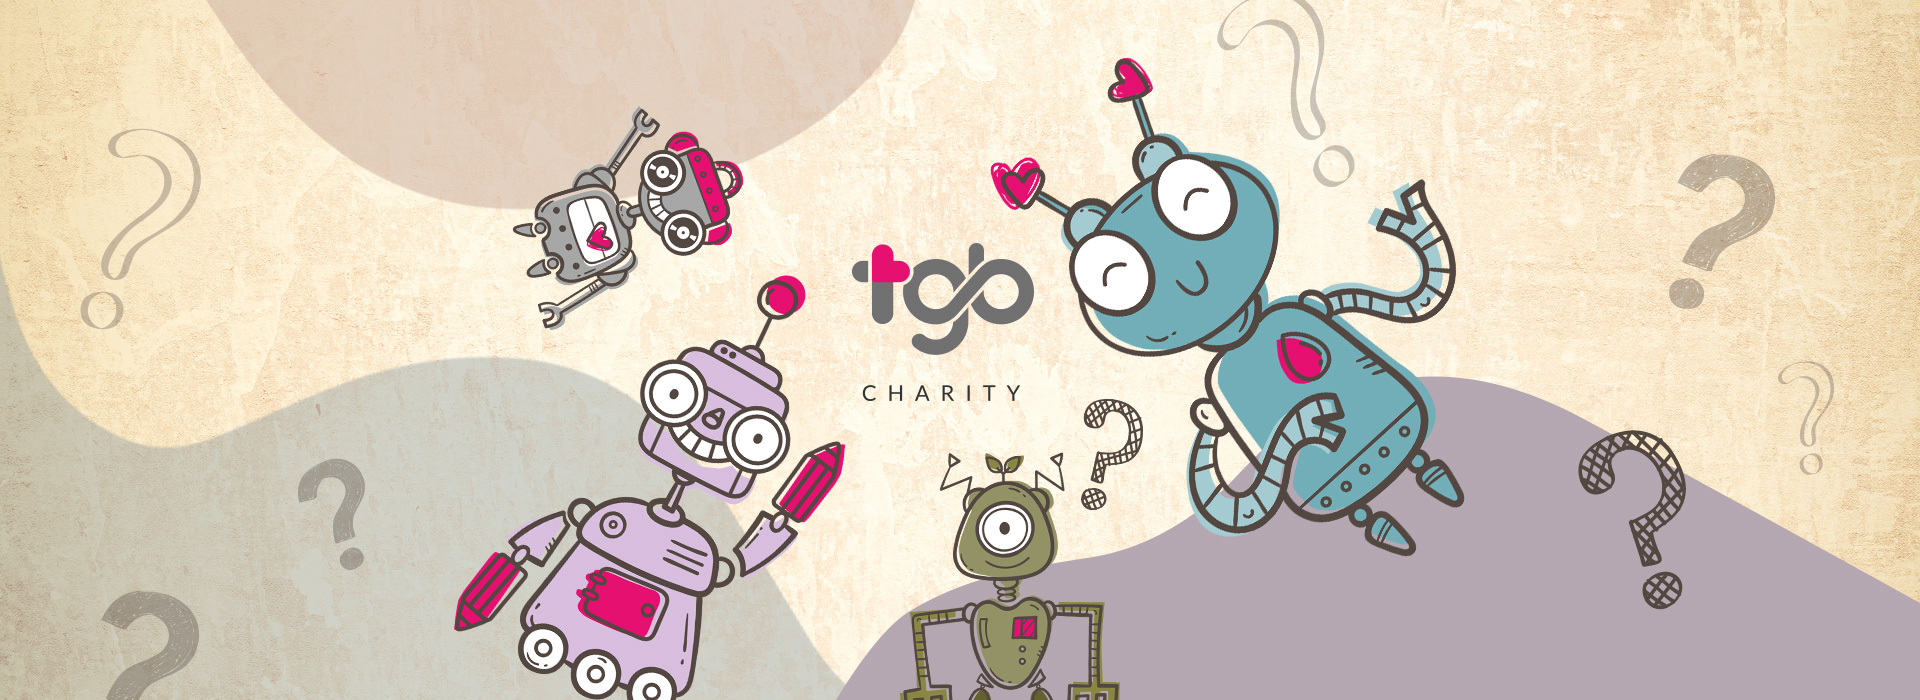 TGB Charity-What Color of Kindness Are You? AI, Artificial Intelligence, robot, 2030, personality quiz, psychology quiz